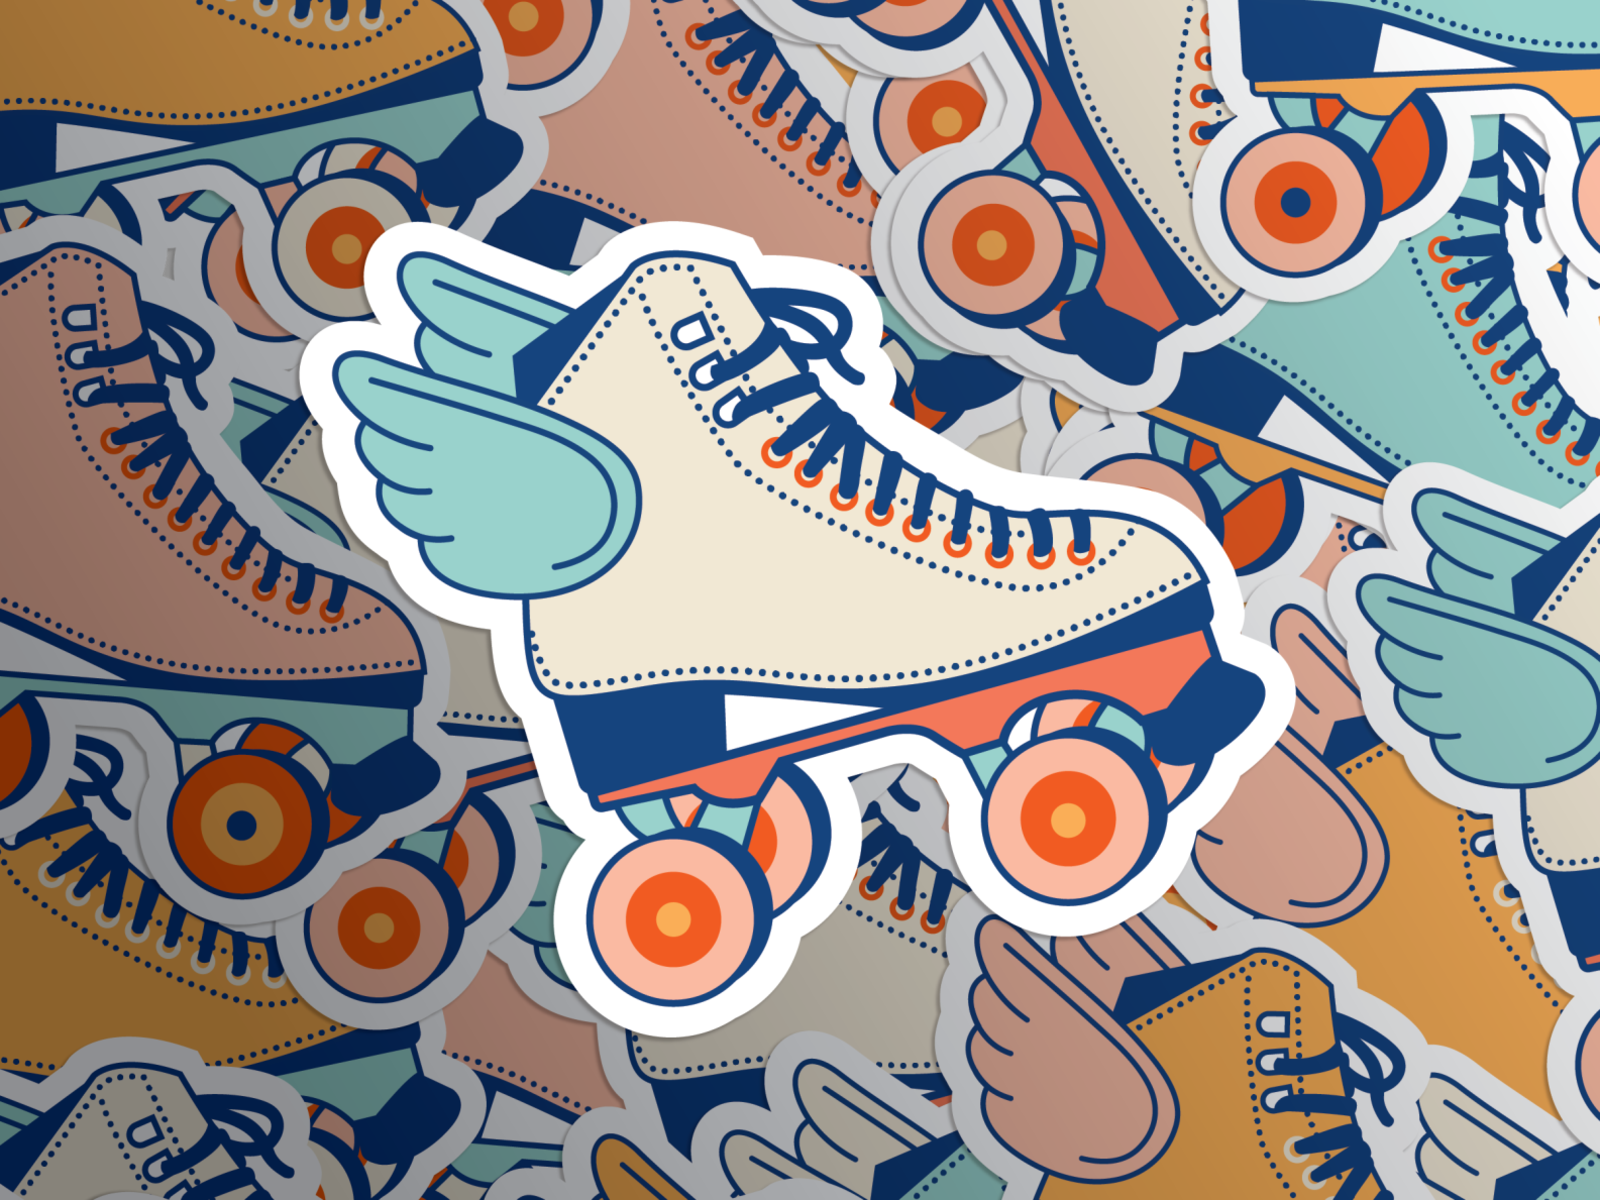 Roller Skate to Liberate Illustration by Lindsay Boivin on Dribbble